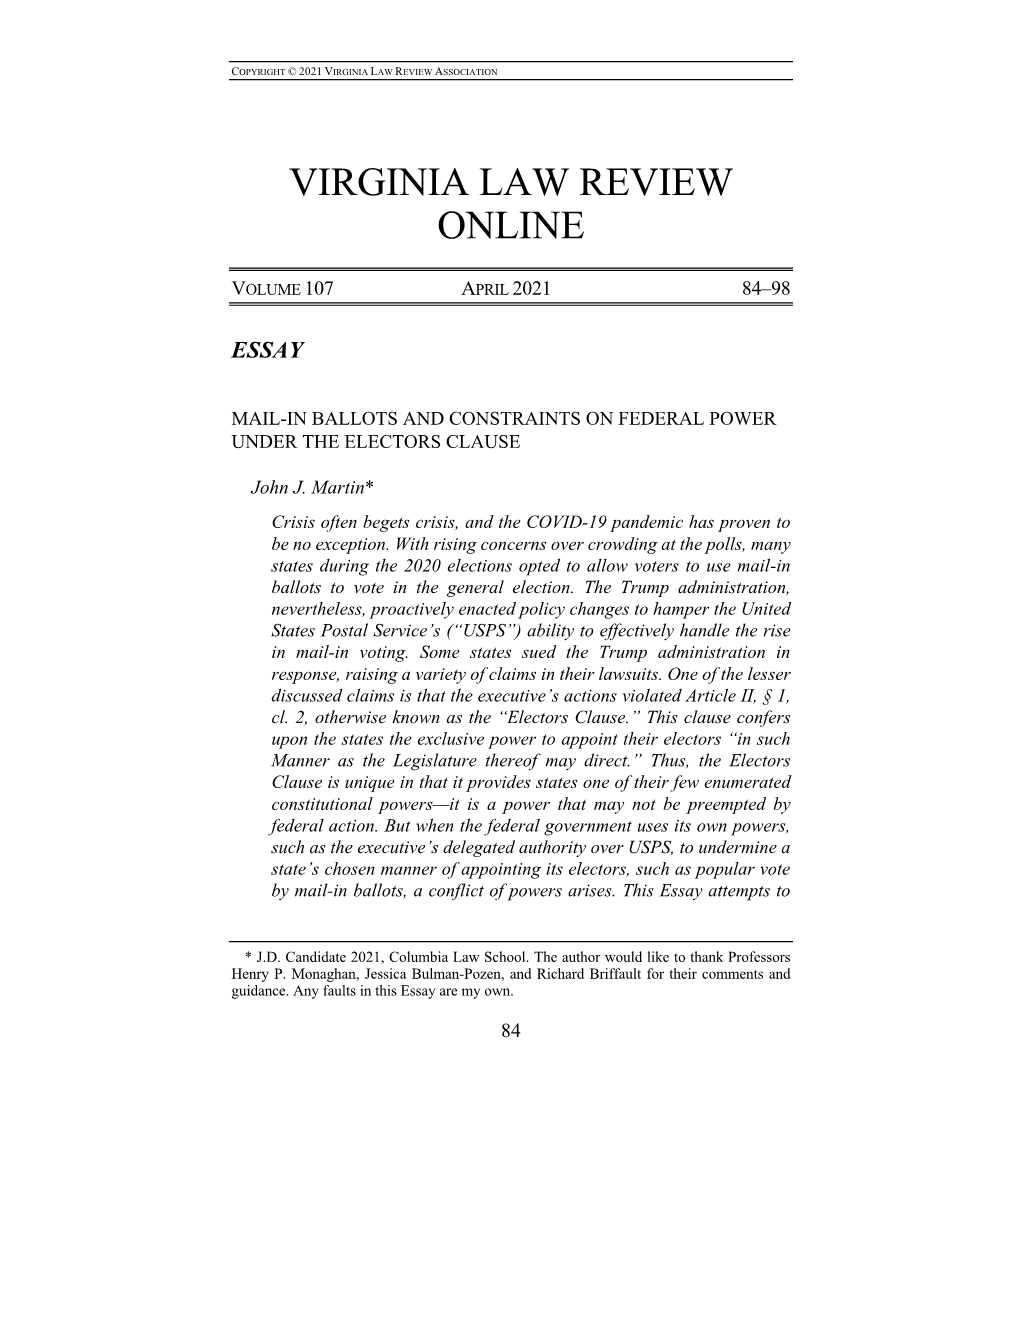 Virginia Law Review Online